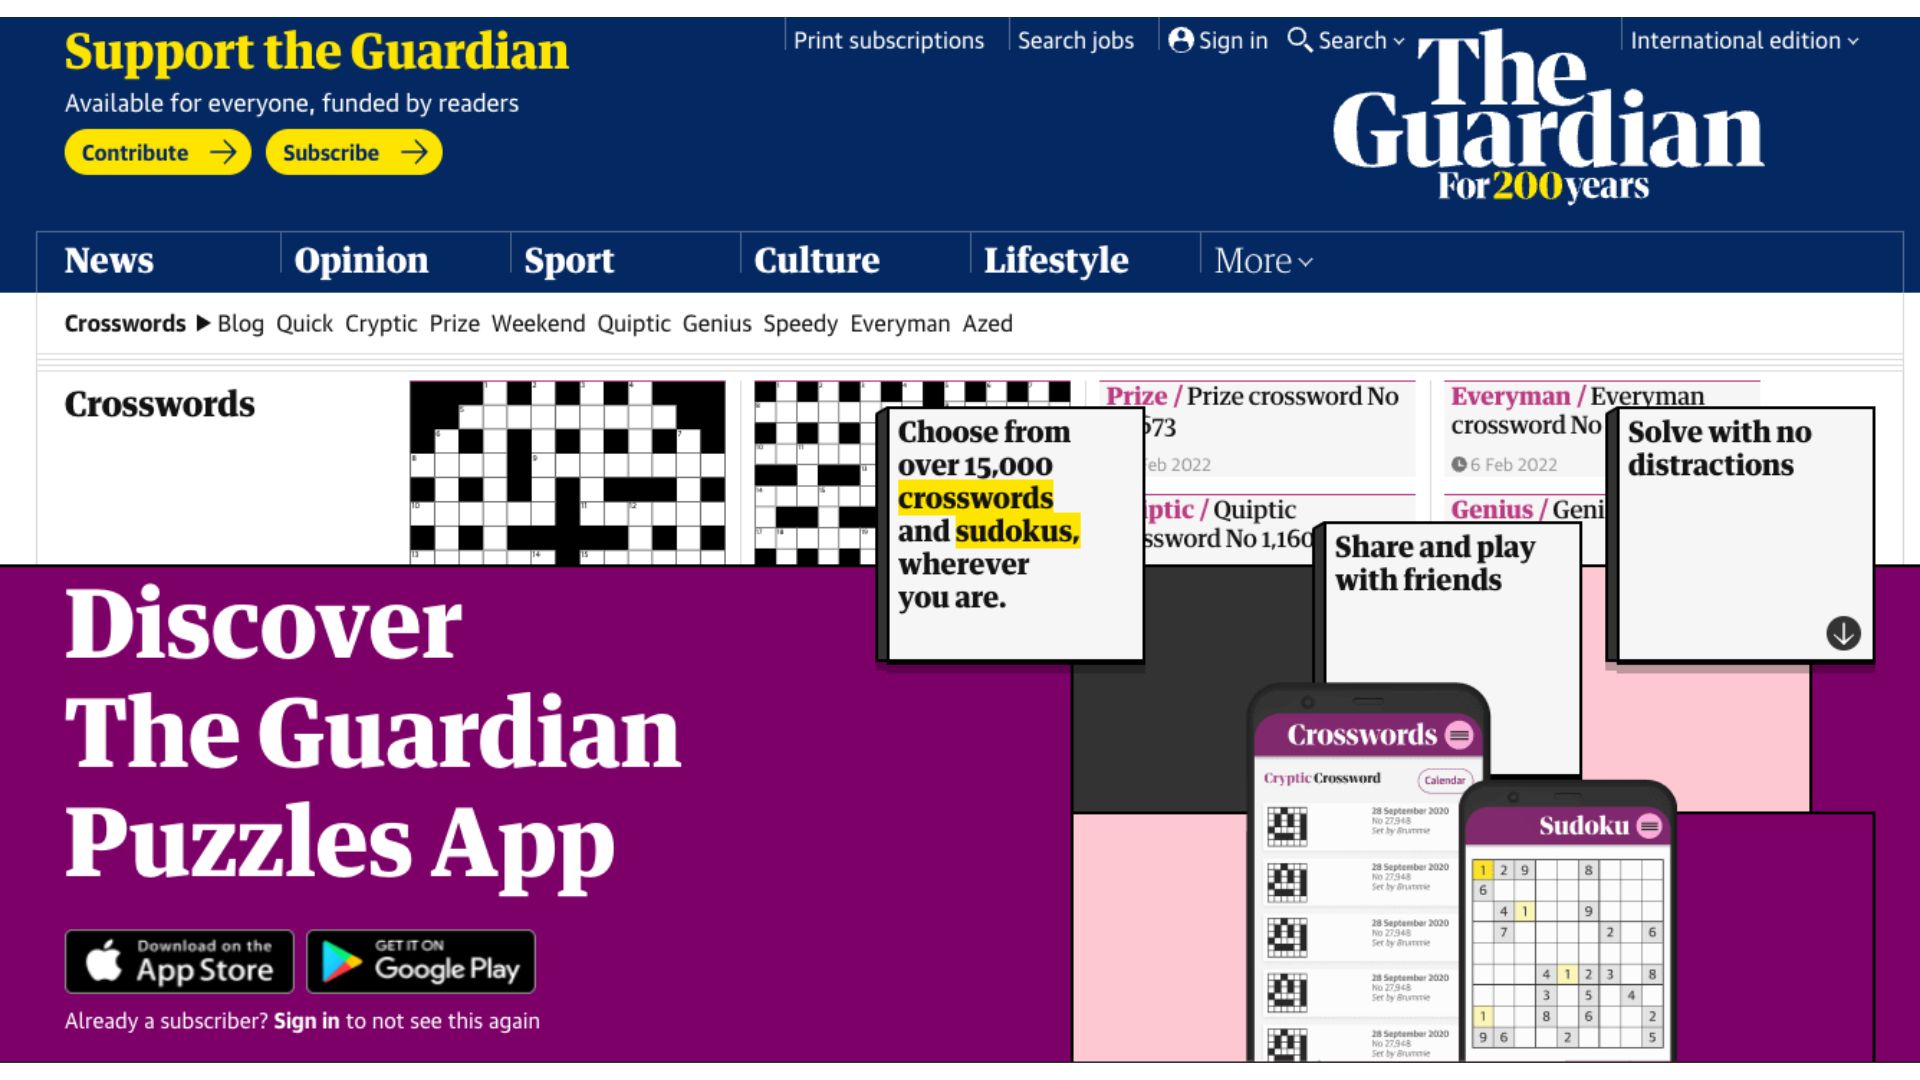 The Guardian engagement